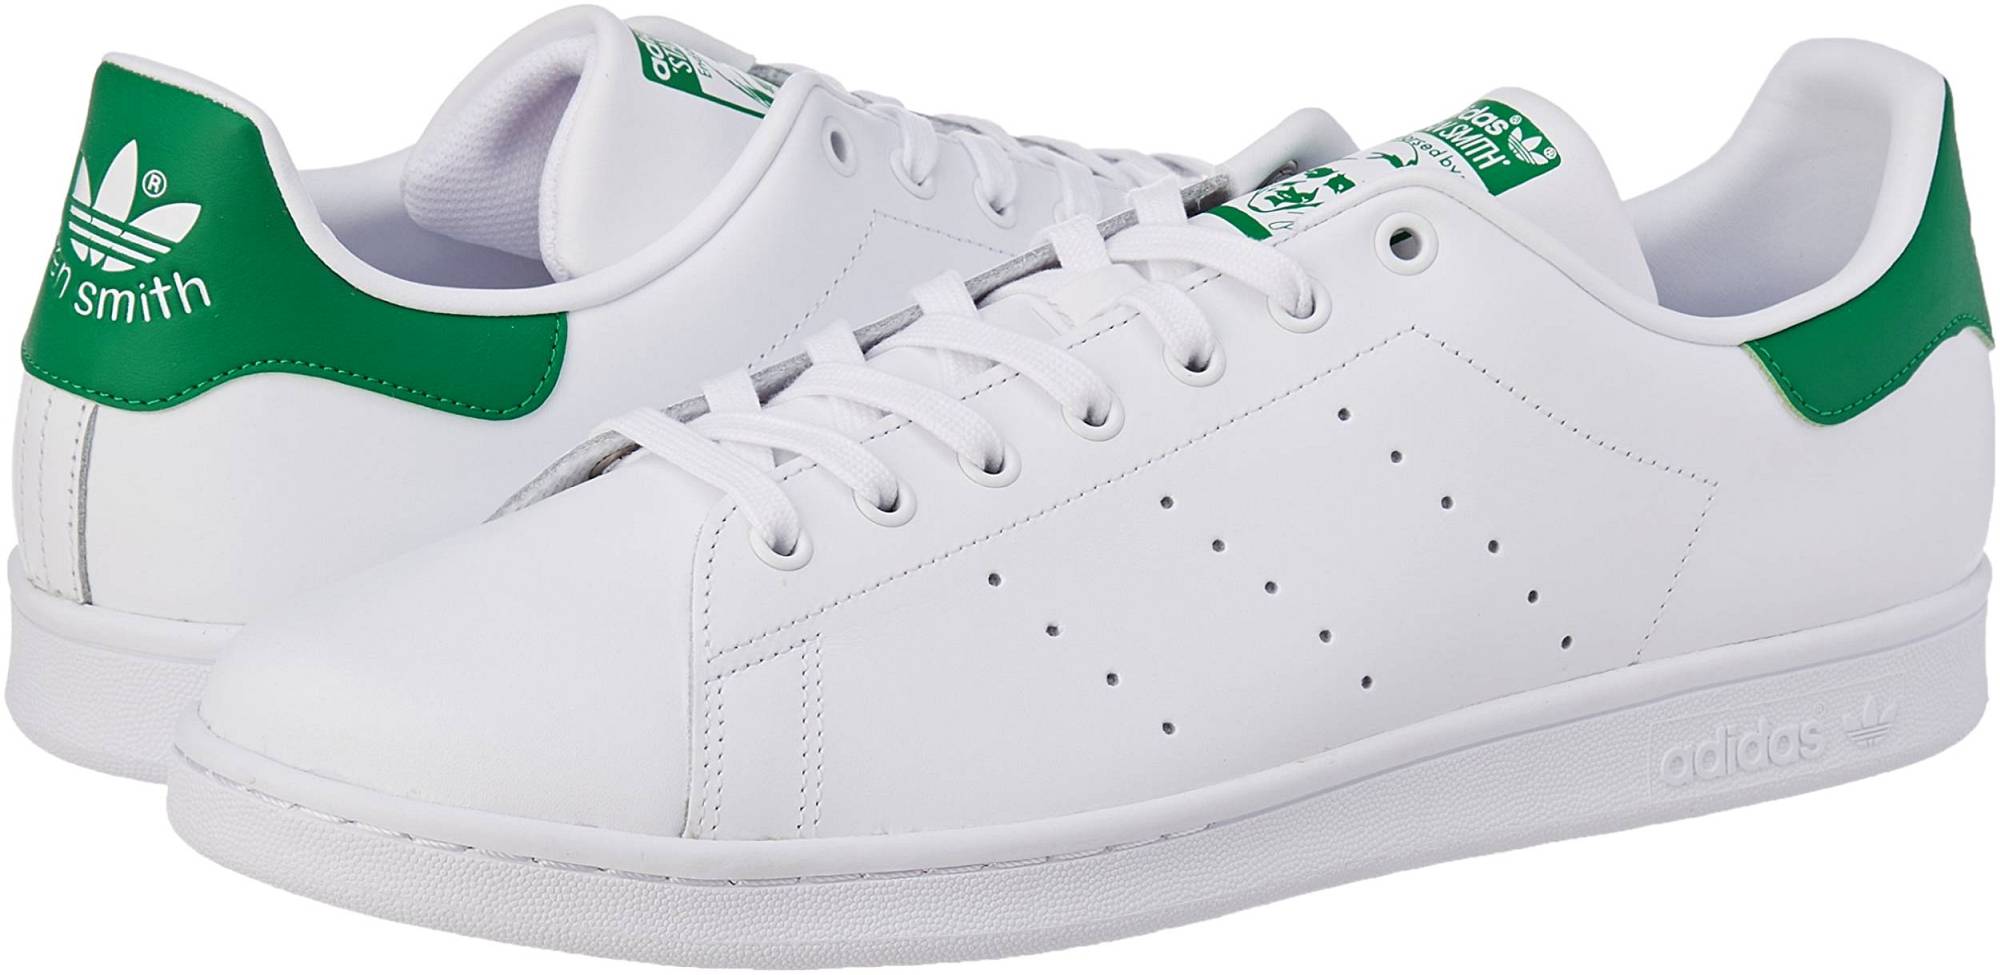 Adidas Stan Smith Shoes Reviews & Reasons To Buy